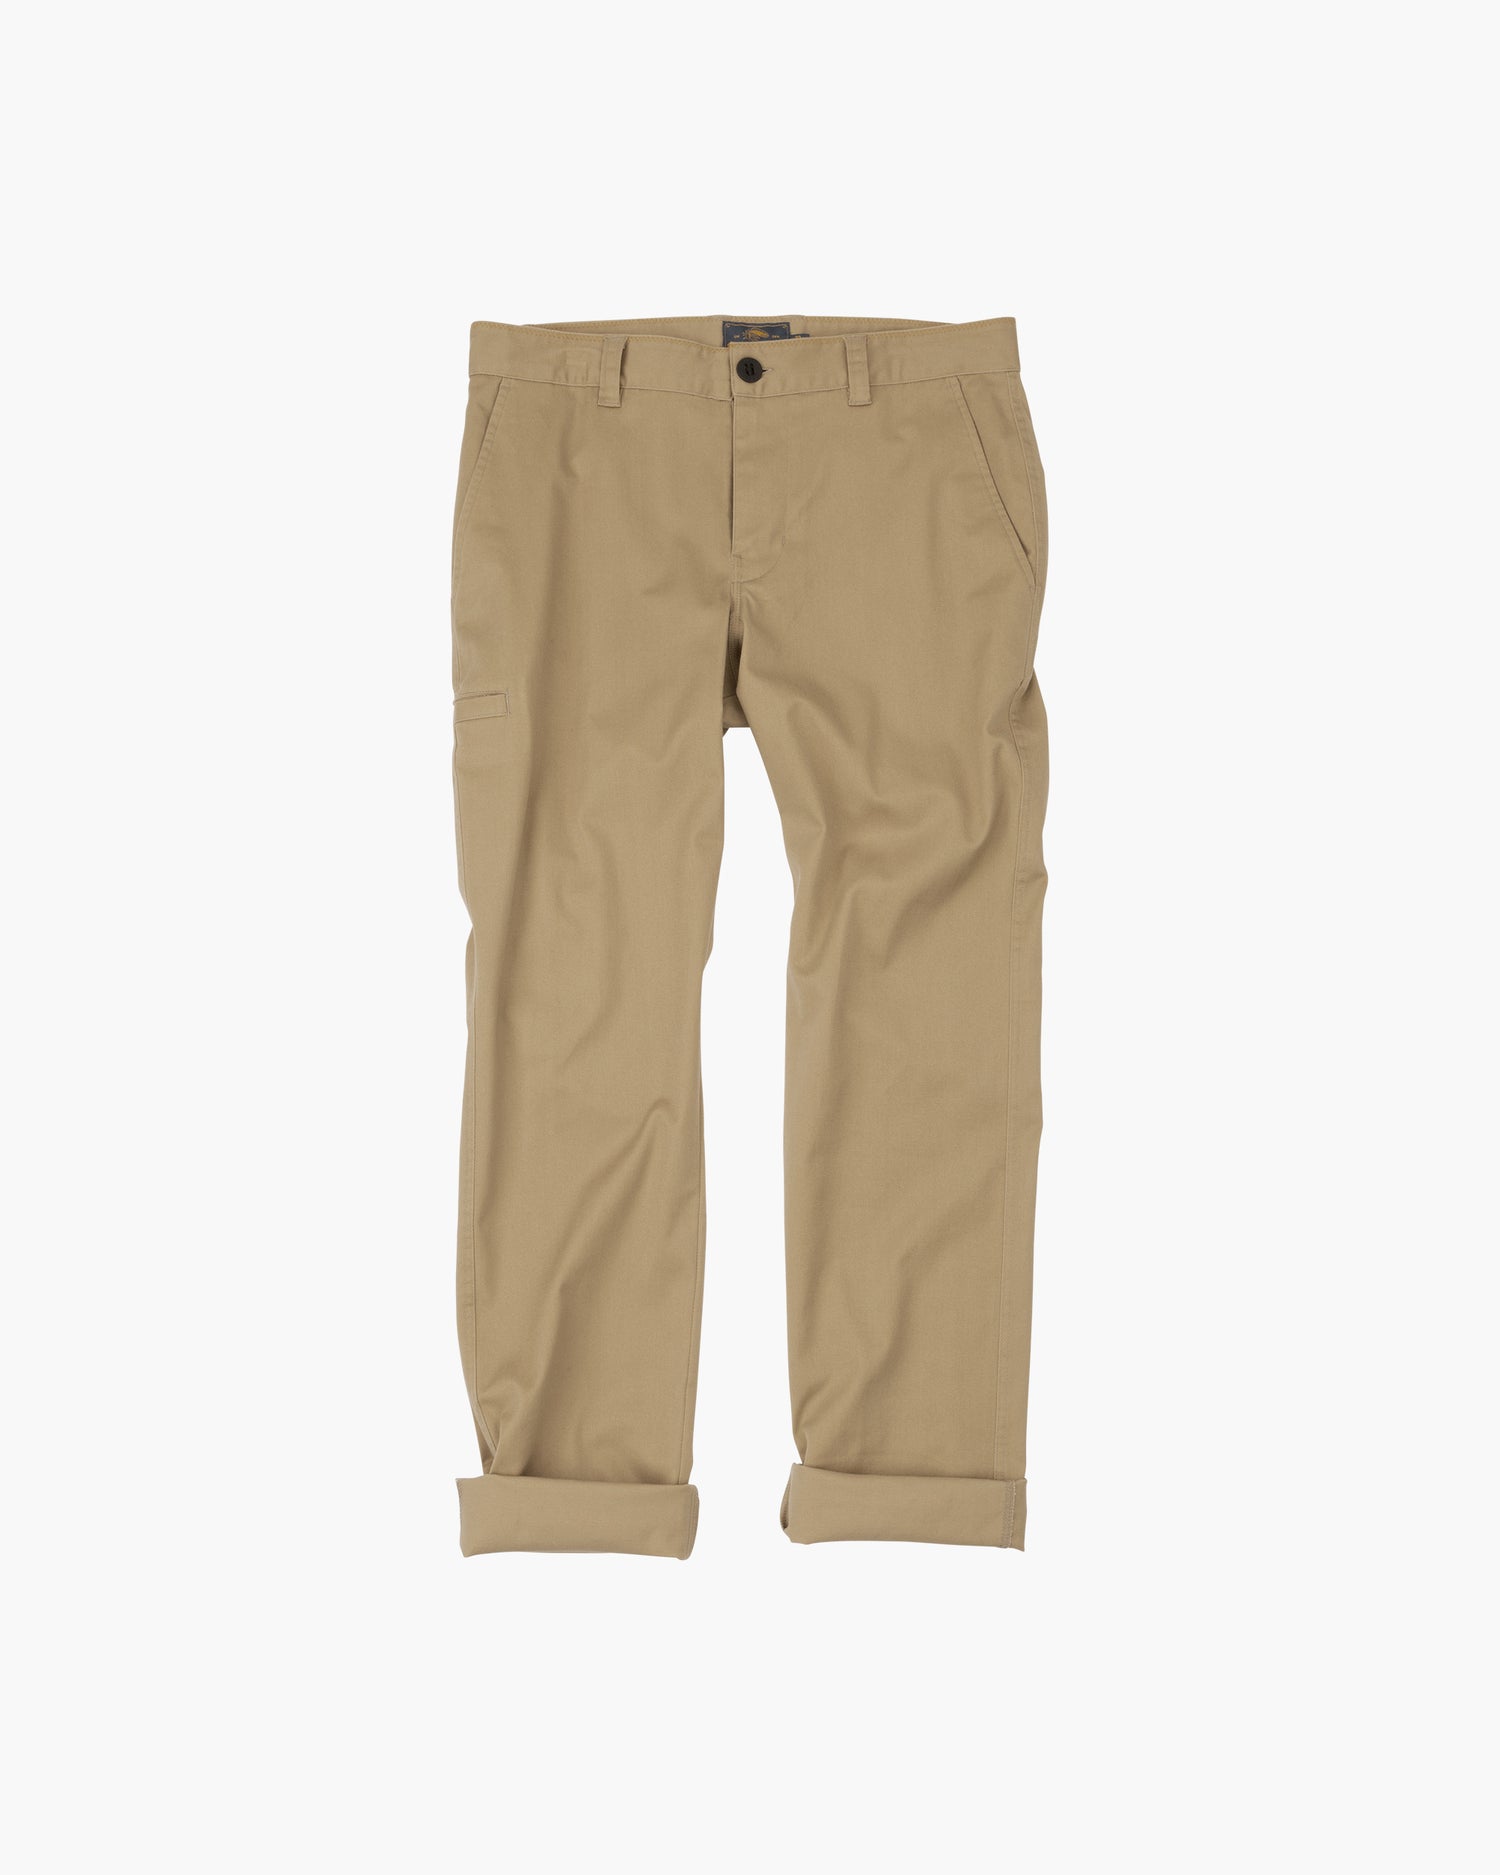 Off body front of Deckhand Workwear Brown Chino Pant